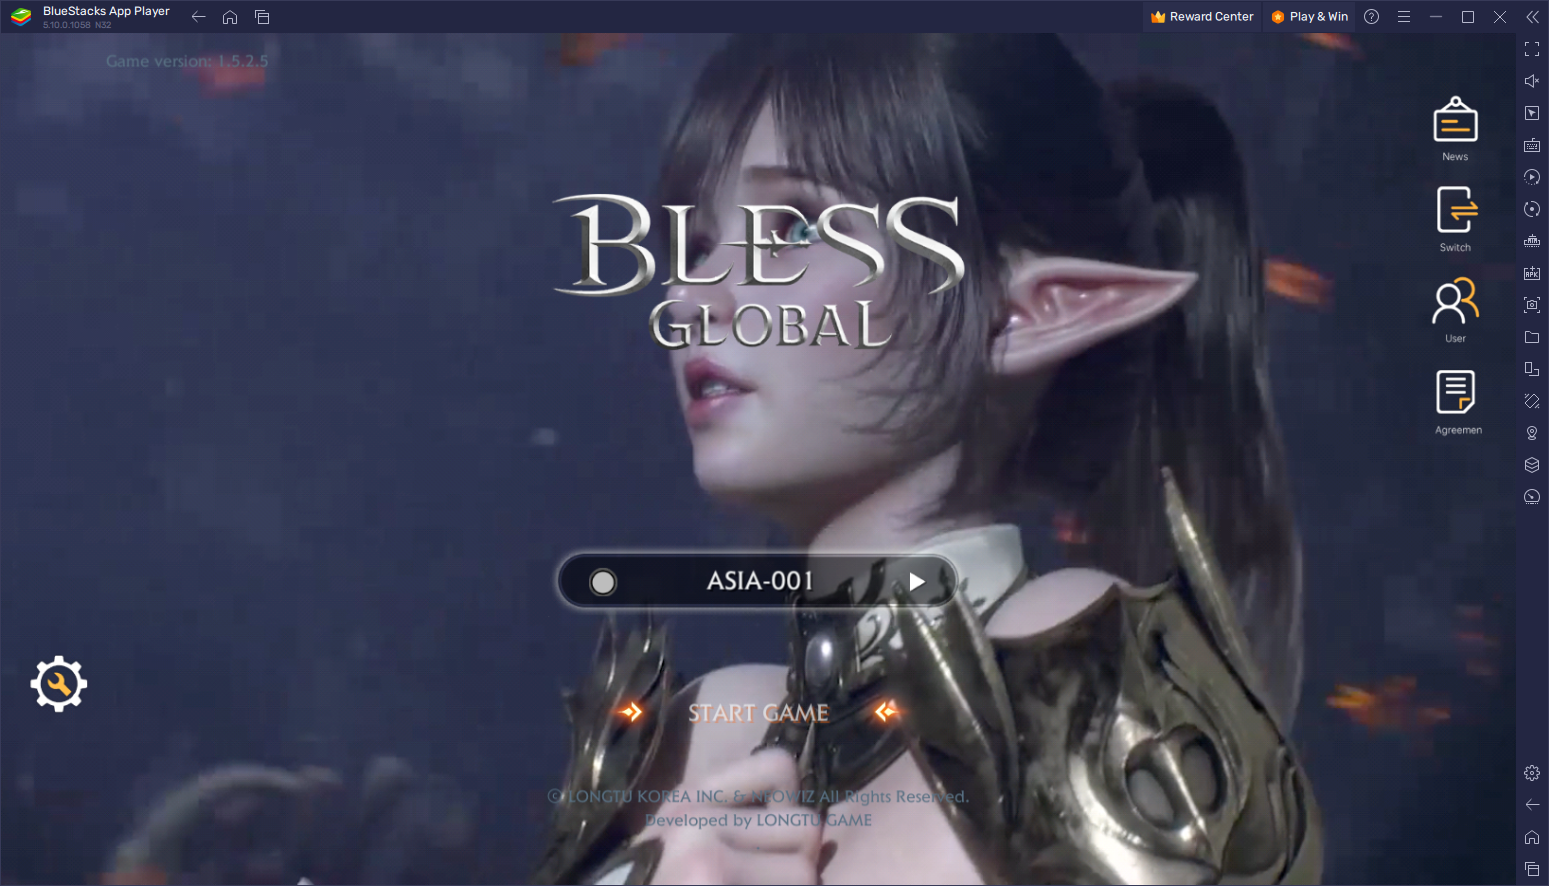 How to Play Bless Global on PC with BlueStacks